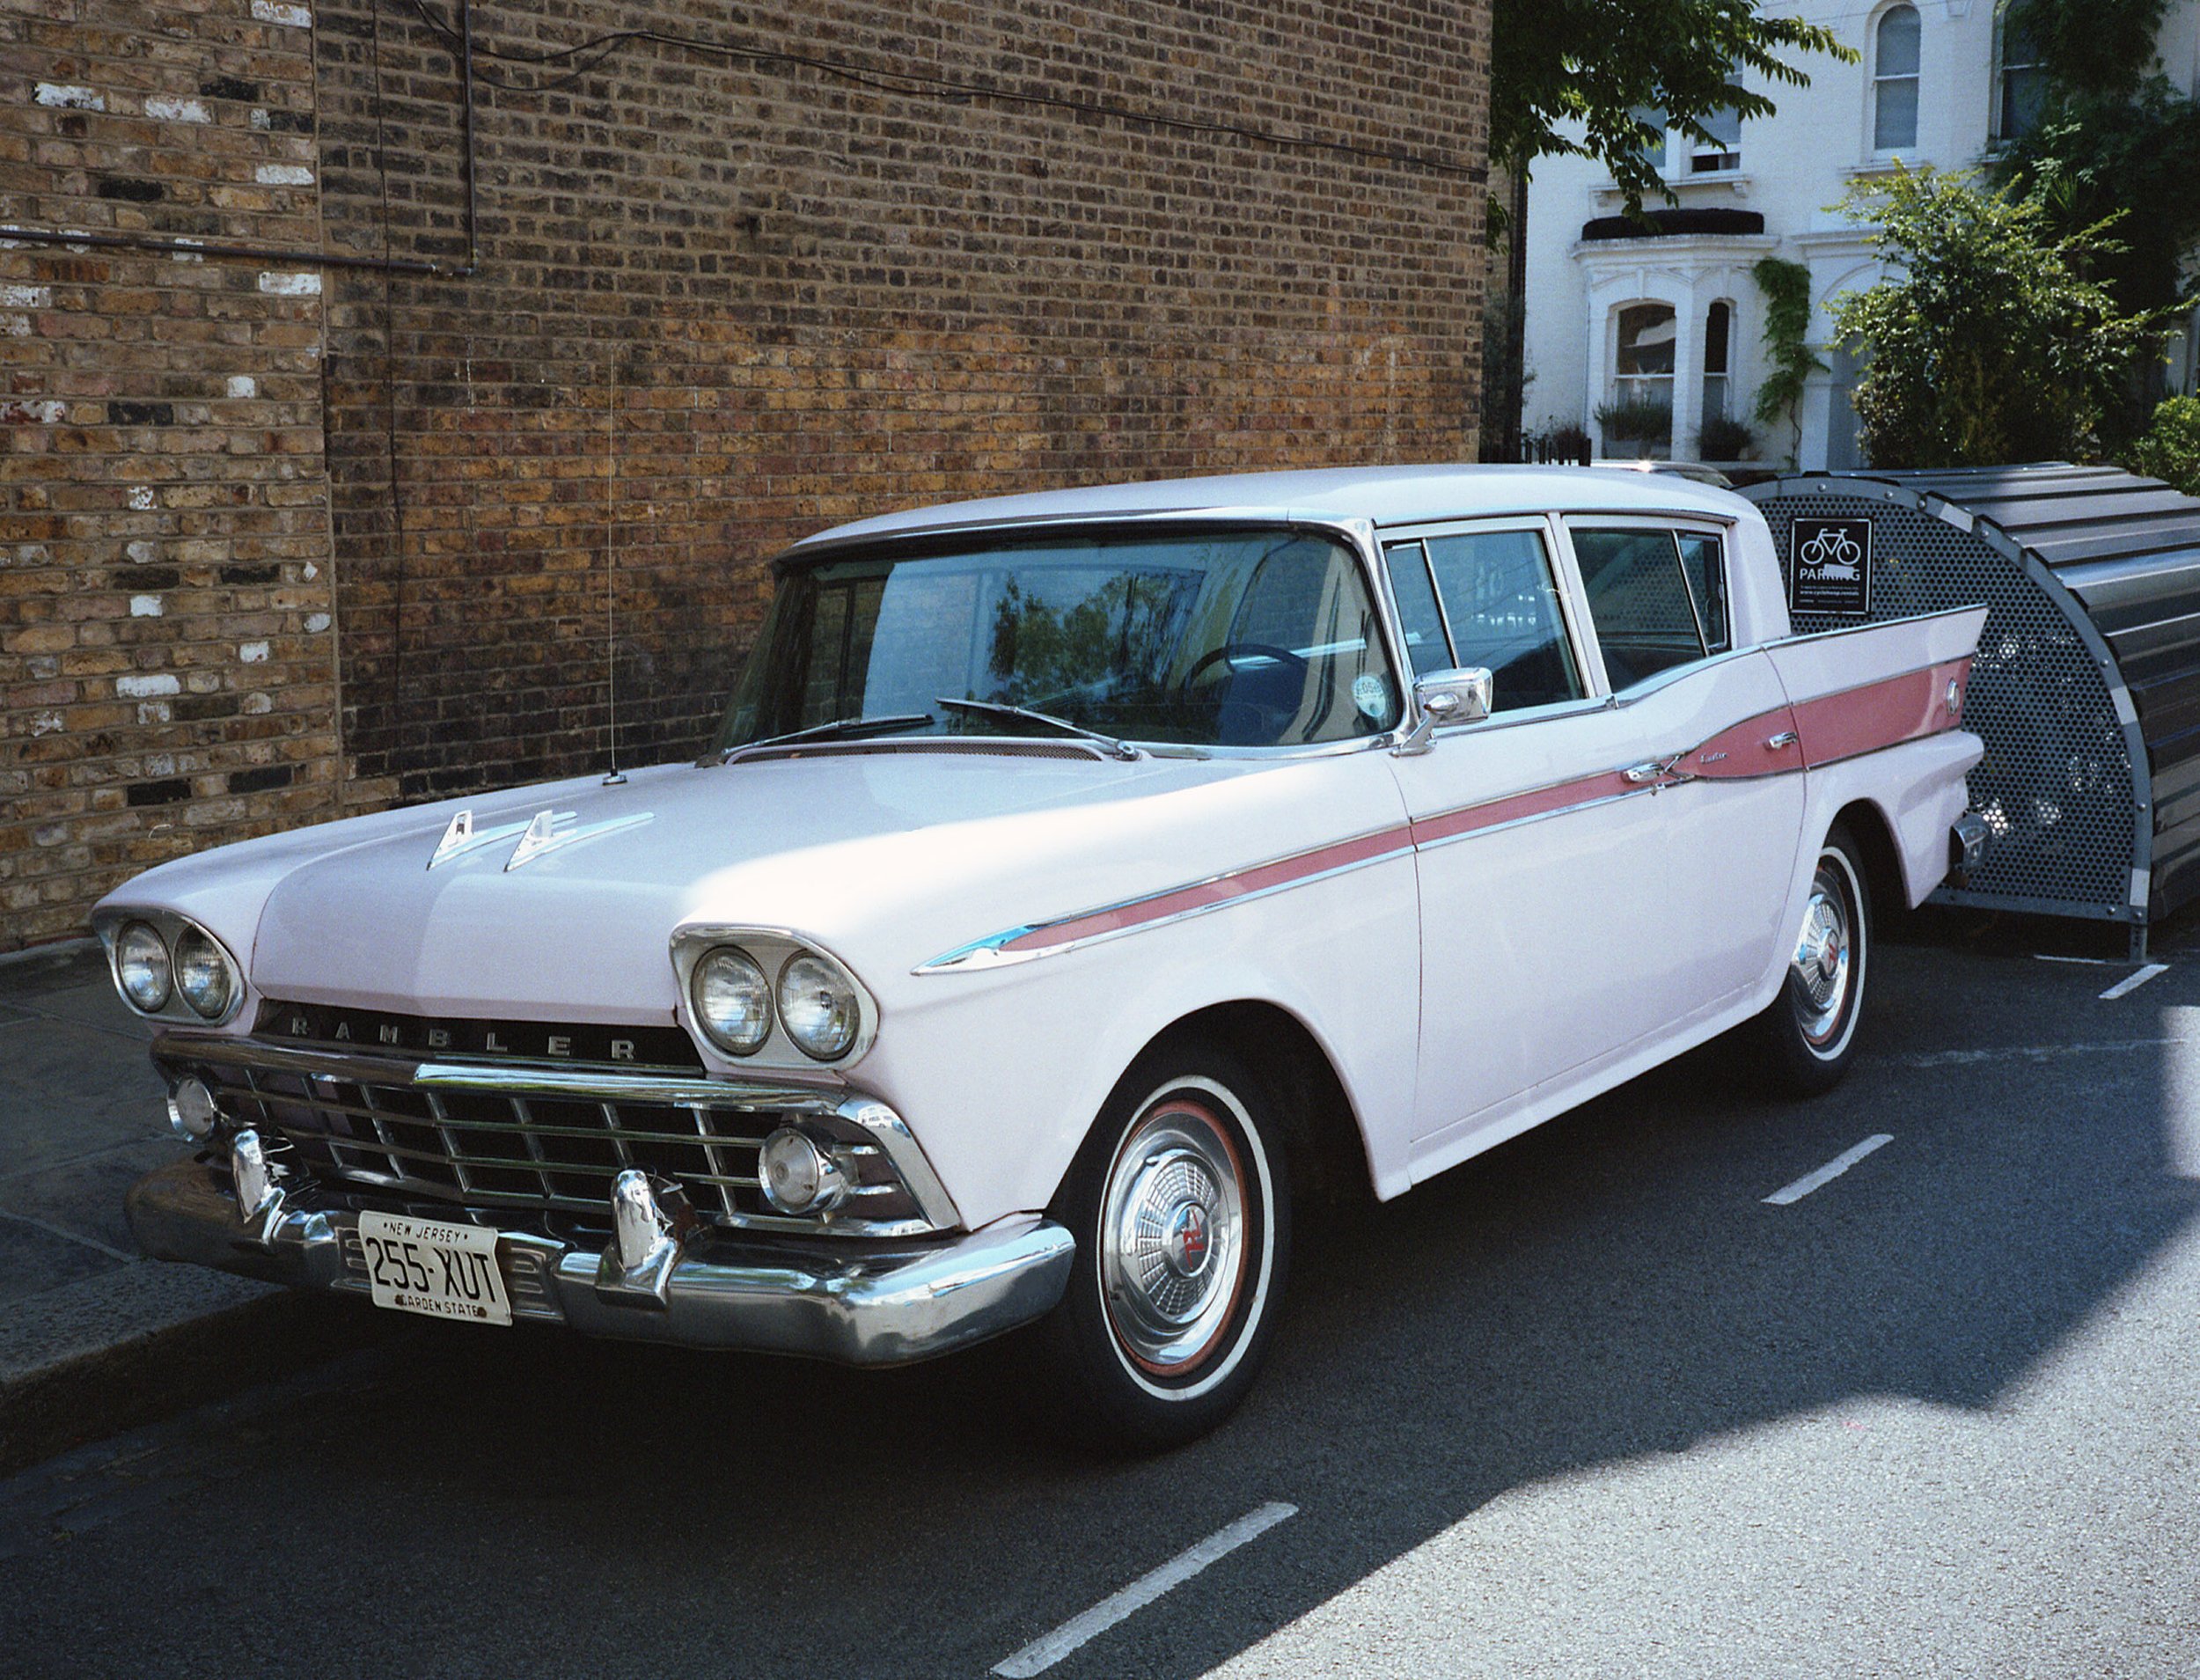  A Rambler in London from New Jersey  